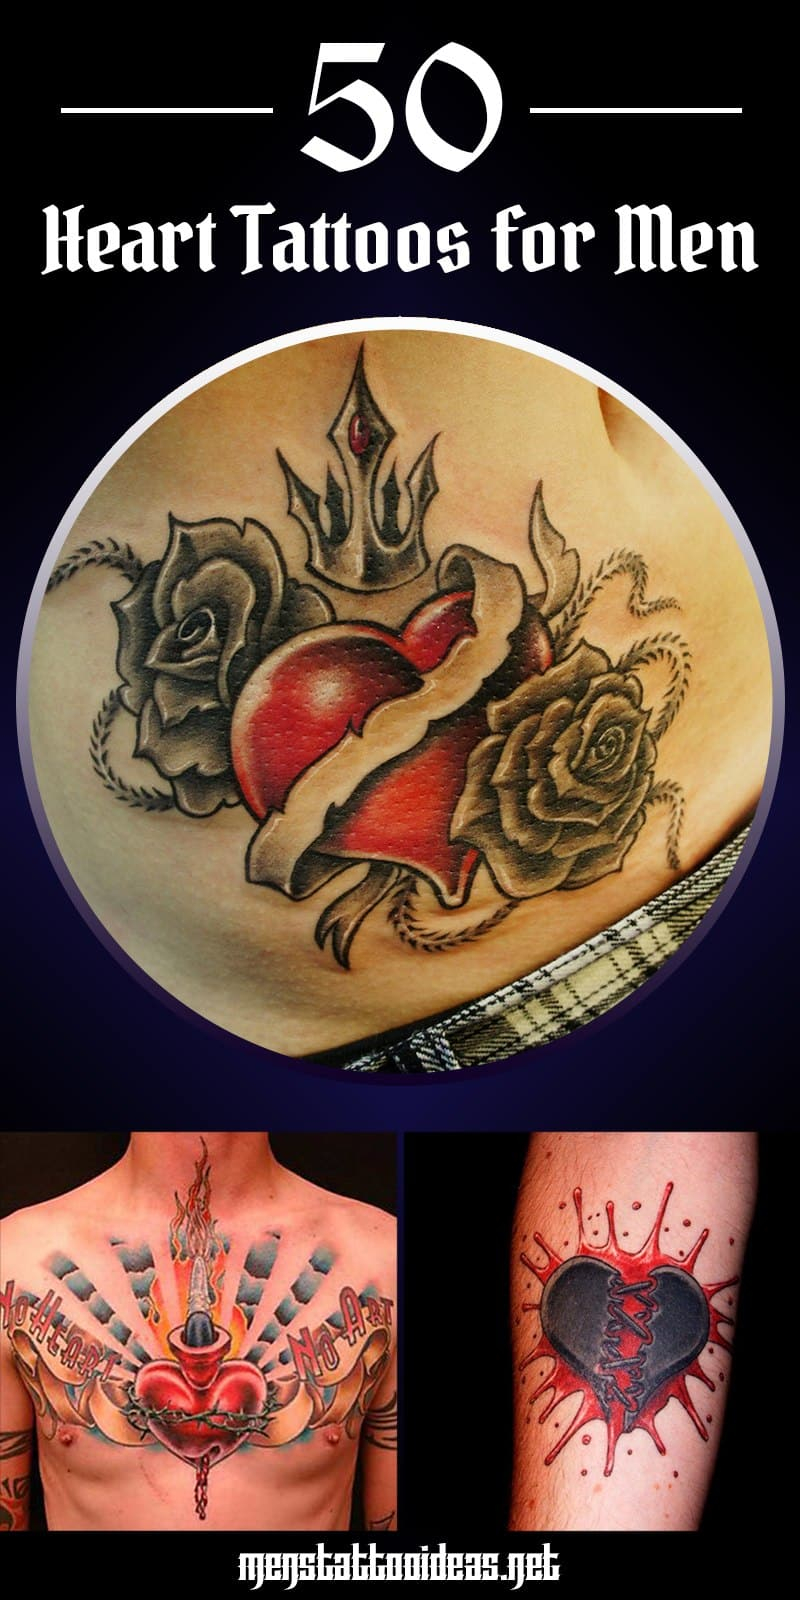 Heart Tattoos For Men Design Ideas For Guys throughout proportions 800 X 1600